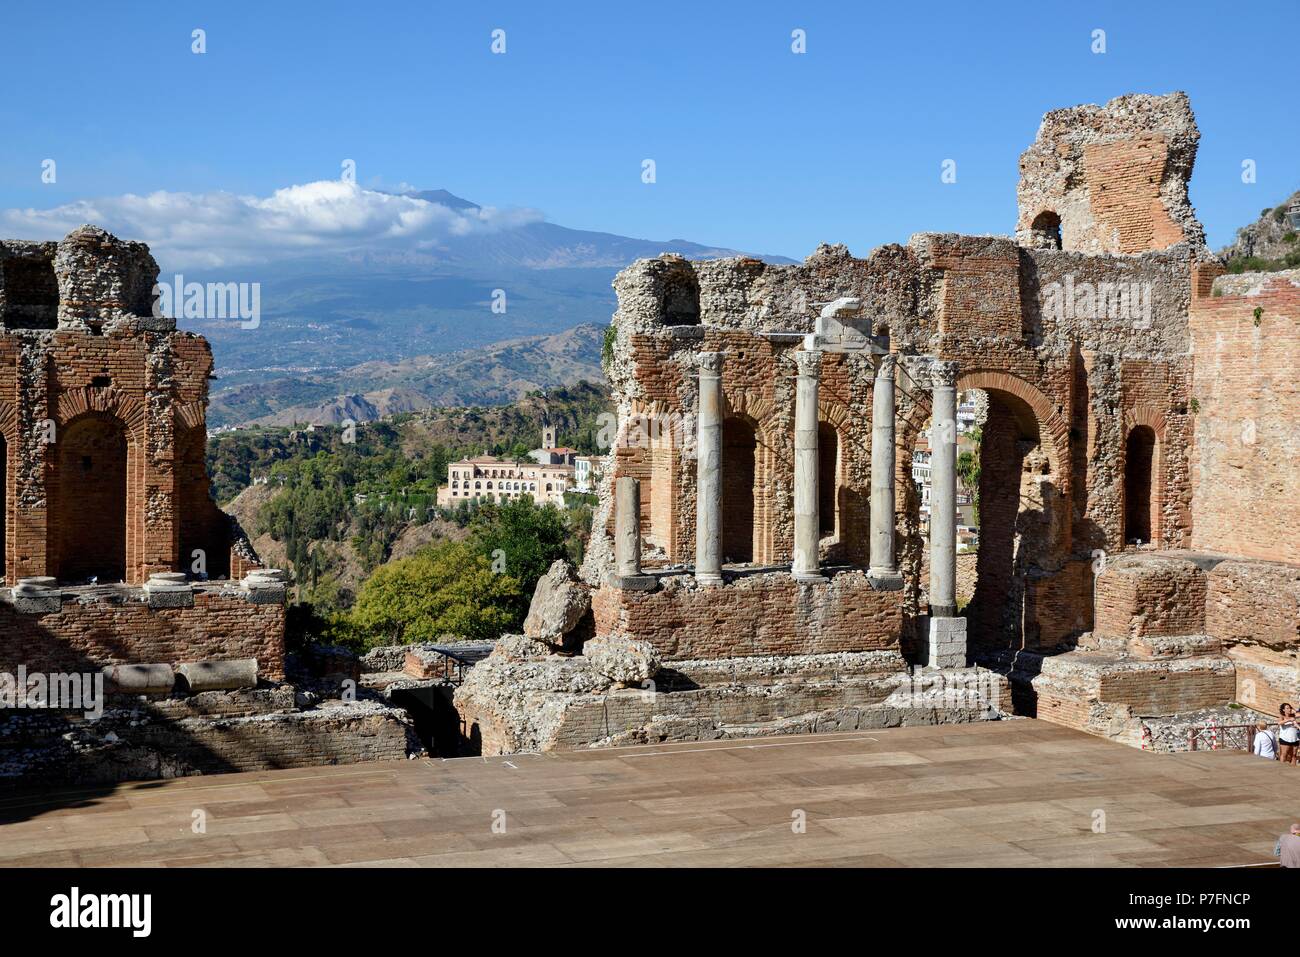 Teatro Greco from the 3rd century A.D. with a view of the volcano Etna, Greek theatre, Taormina, Messina province, Sicily, Italy Stock Photo